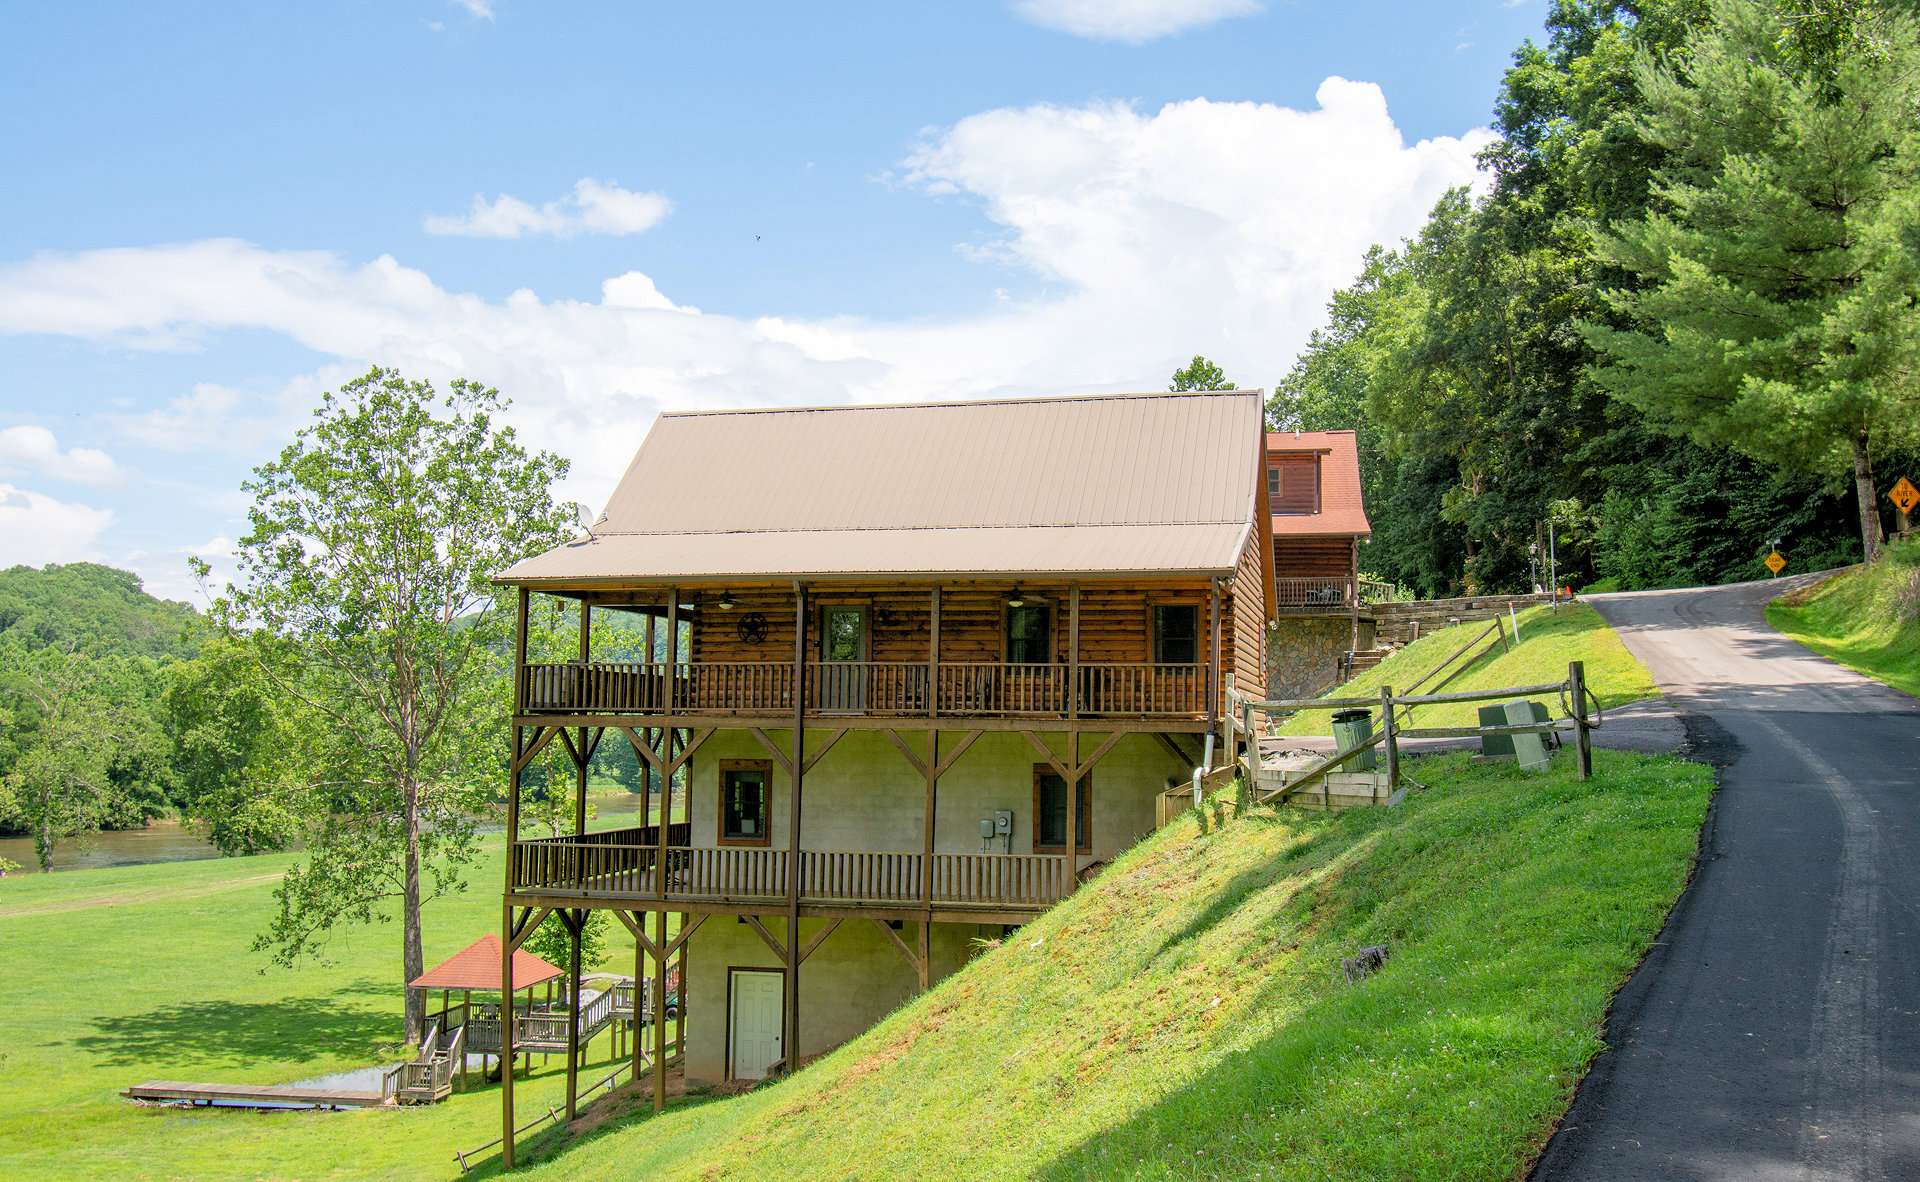 This 3-bedroom, 3-bath log cabin offers a wonderful mountain and river retreat for those seeking to get away for fresh mountain air and water recreation.